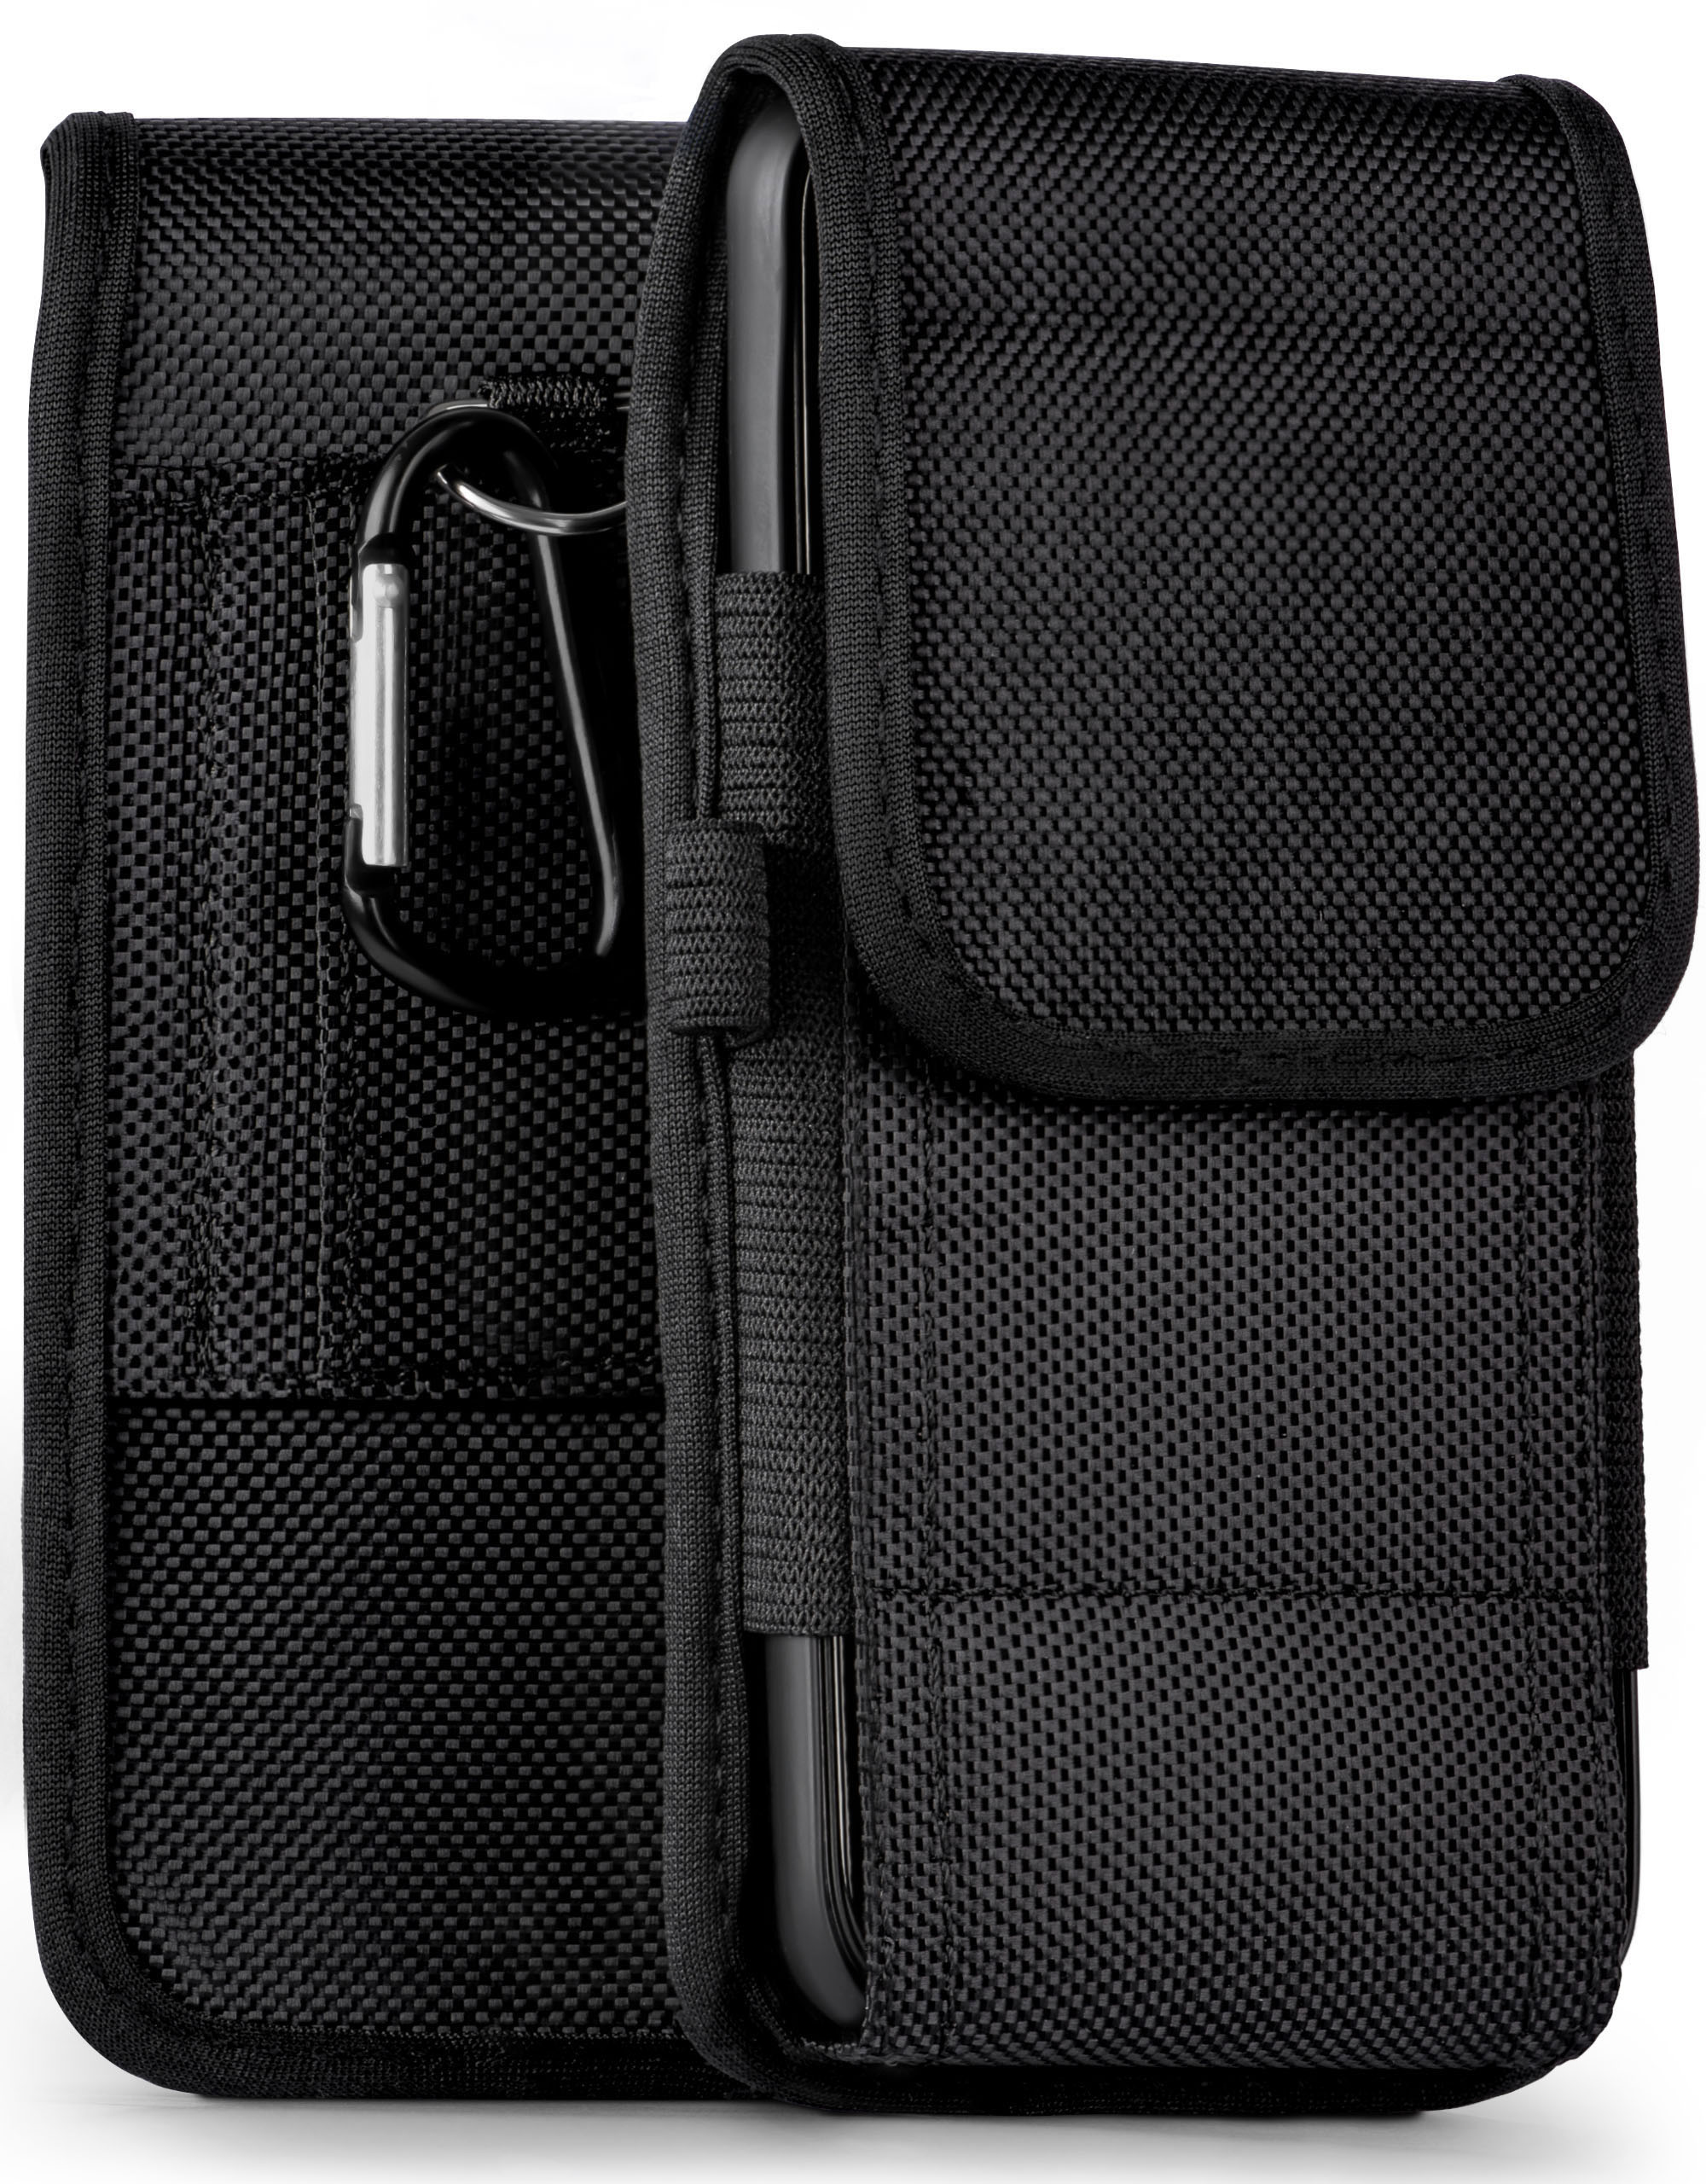 Trail Case, MOEX 6, Agility OnePlus, Holster,